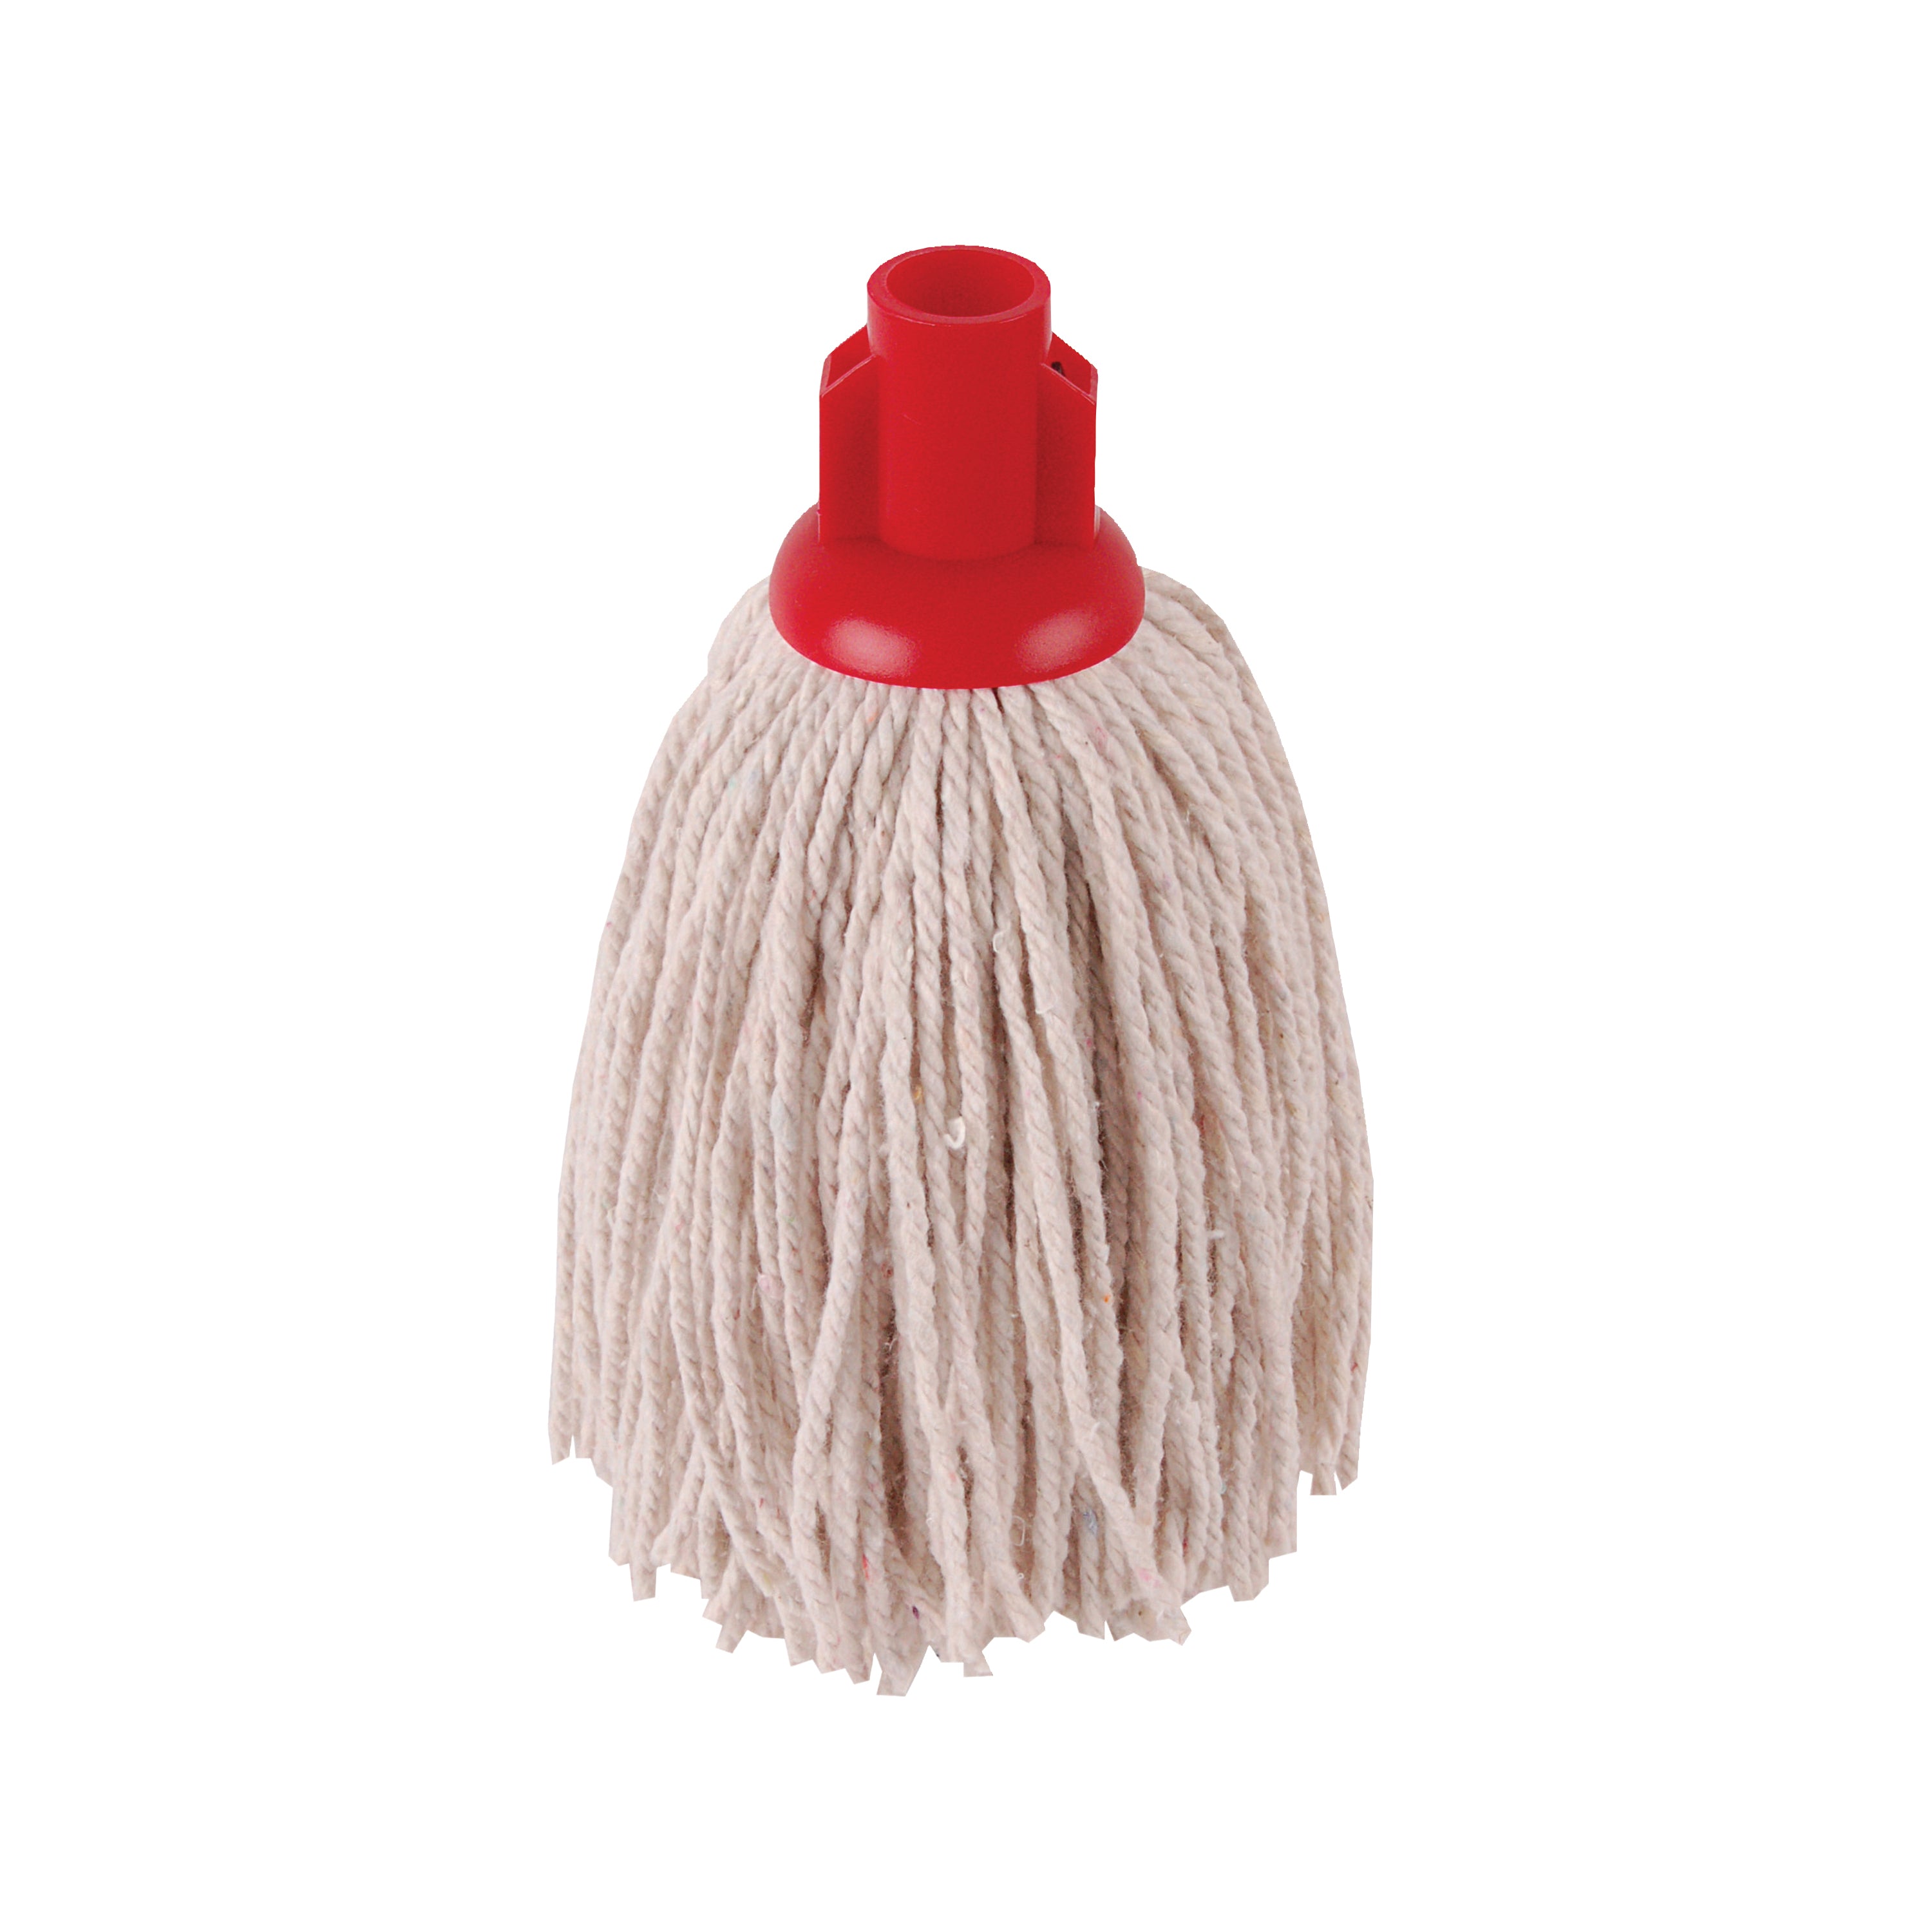 2Work PY Smooth Socket Mop 12oz Red (Pack of 10) 2W04301